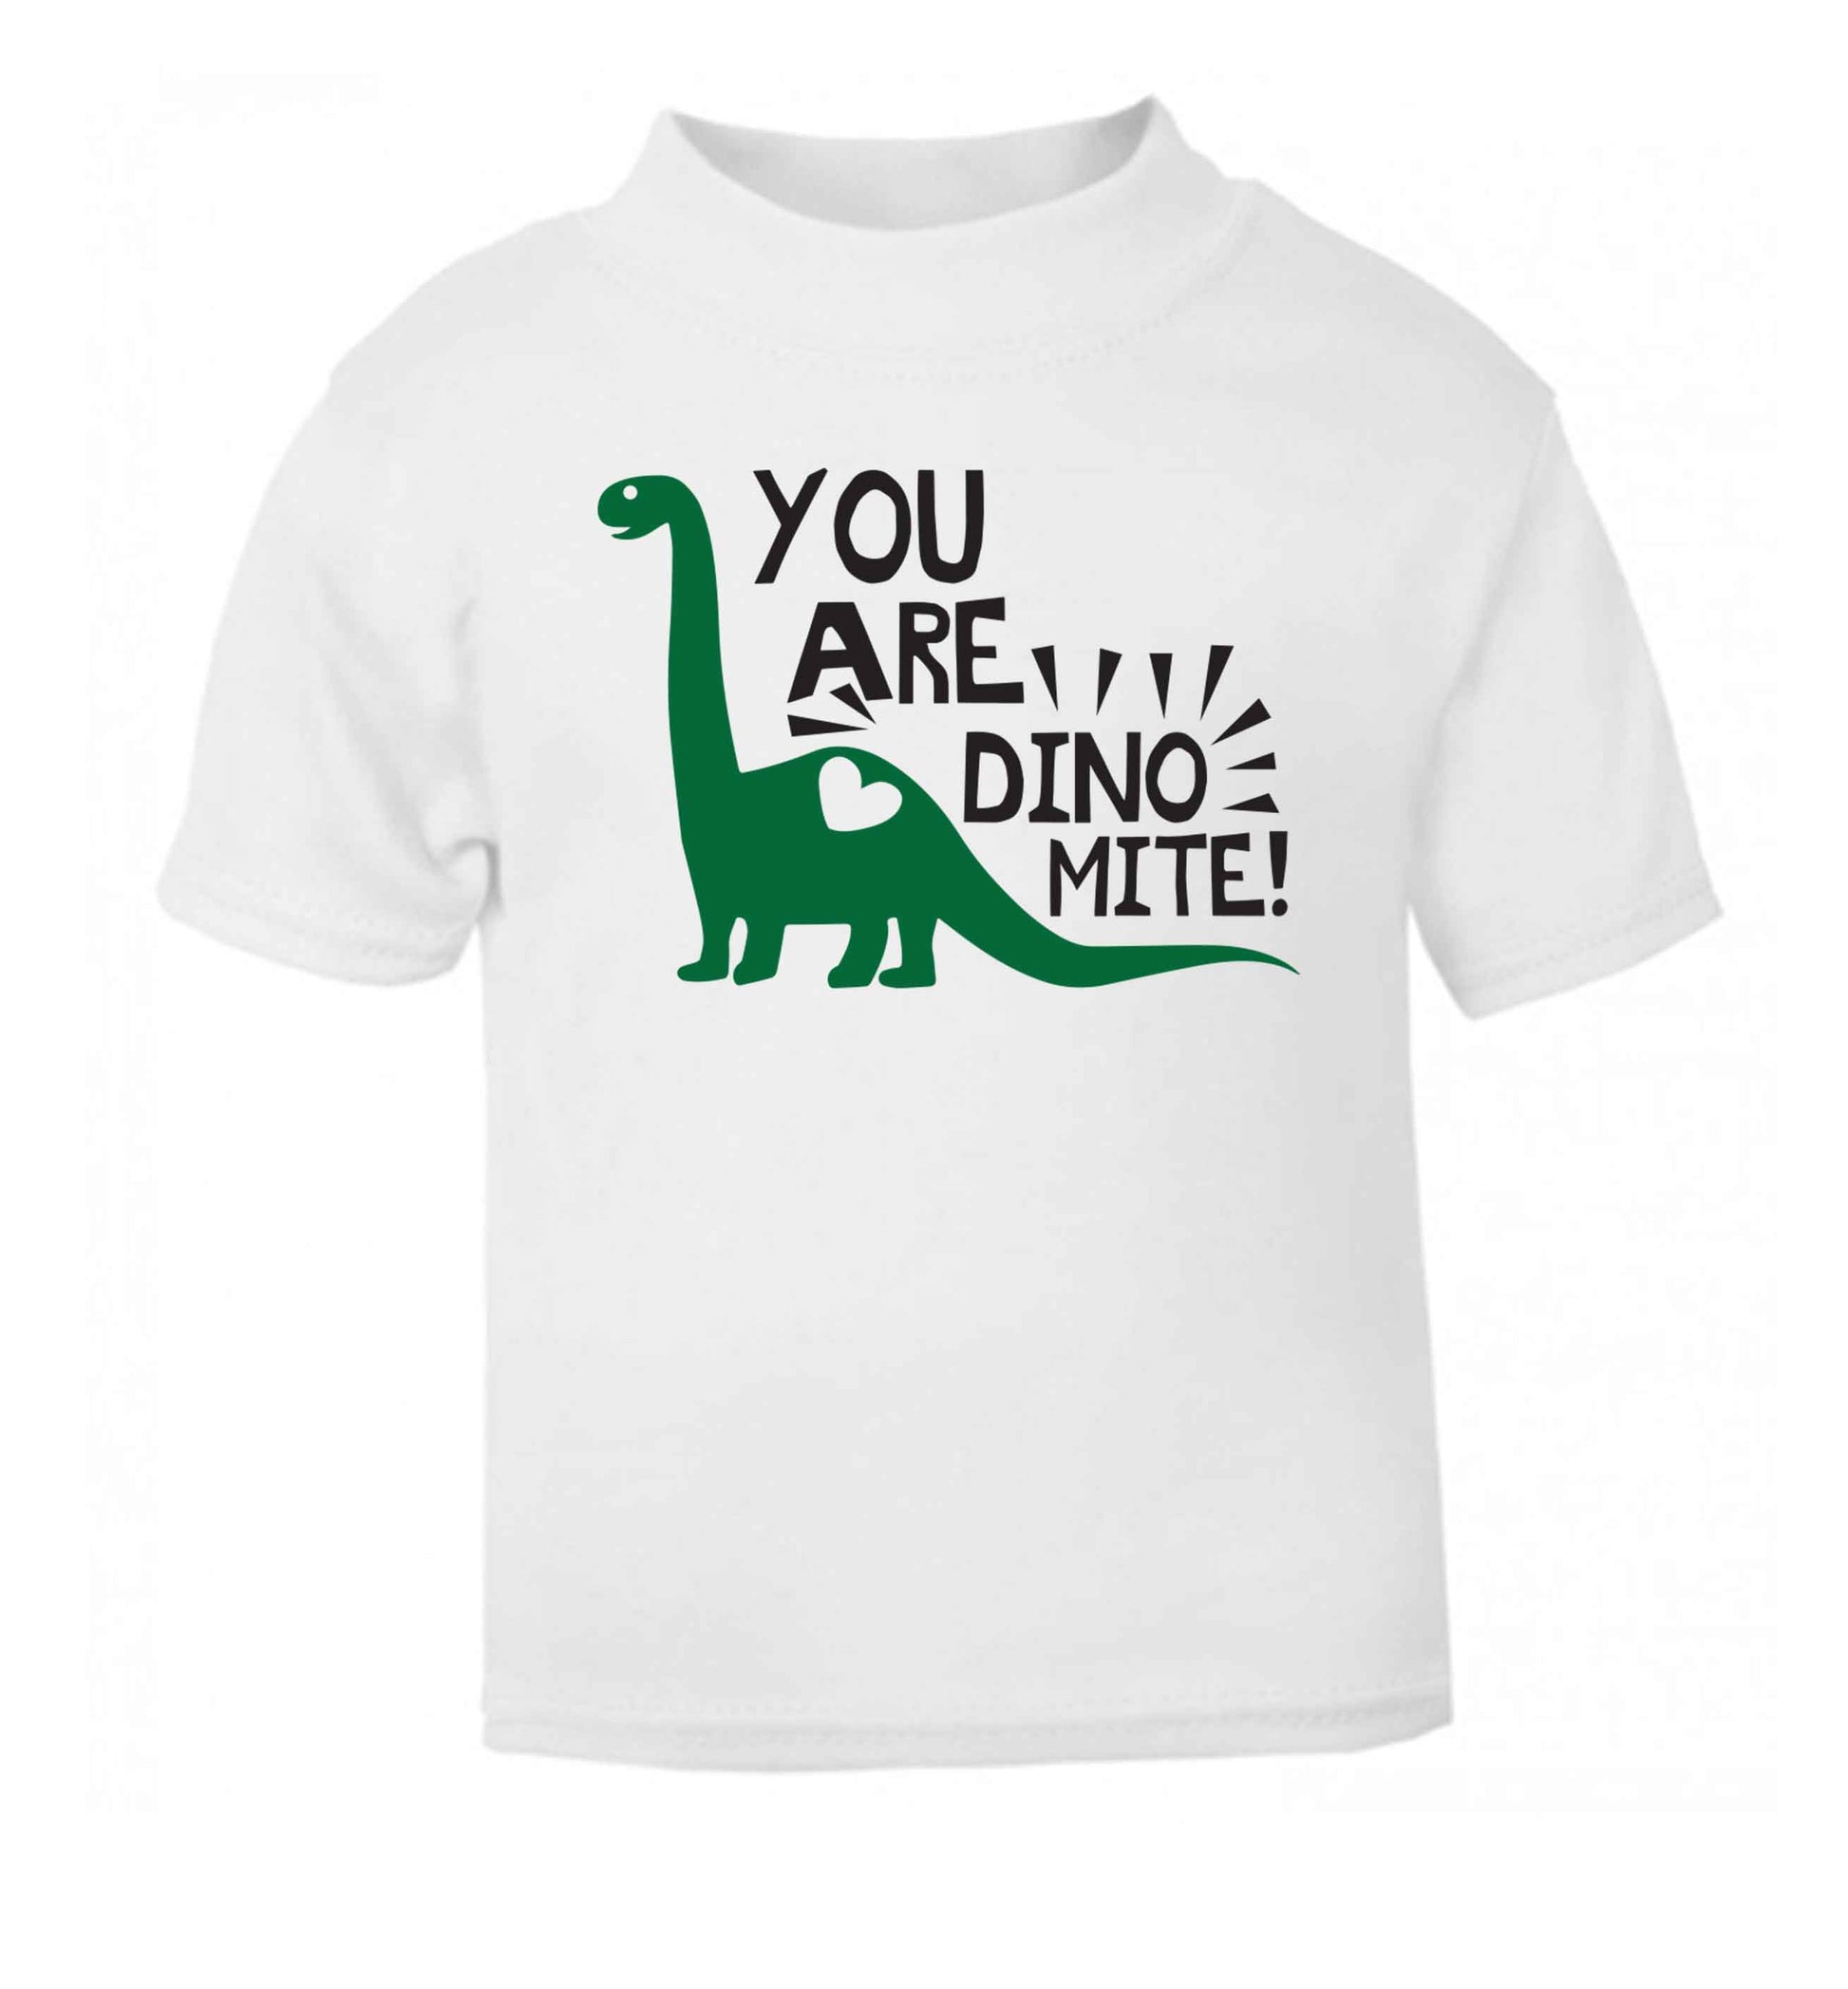 You are dinomite! white Baby Toddler Tshirt 2 Years